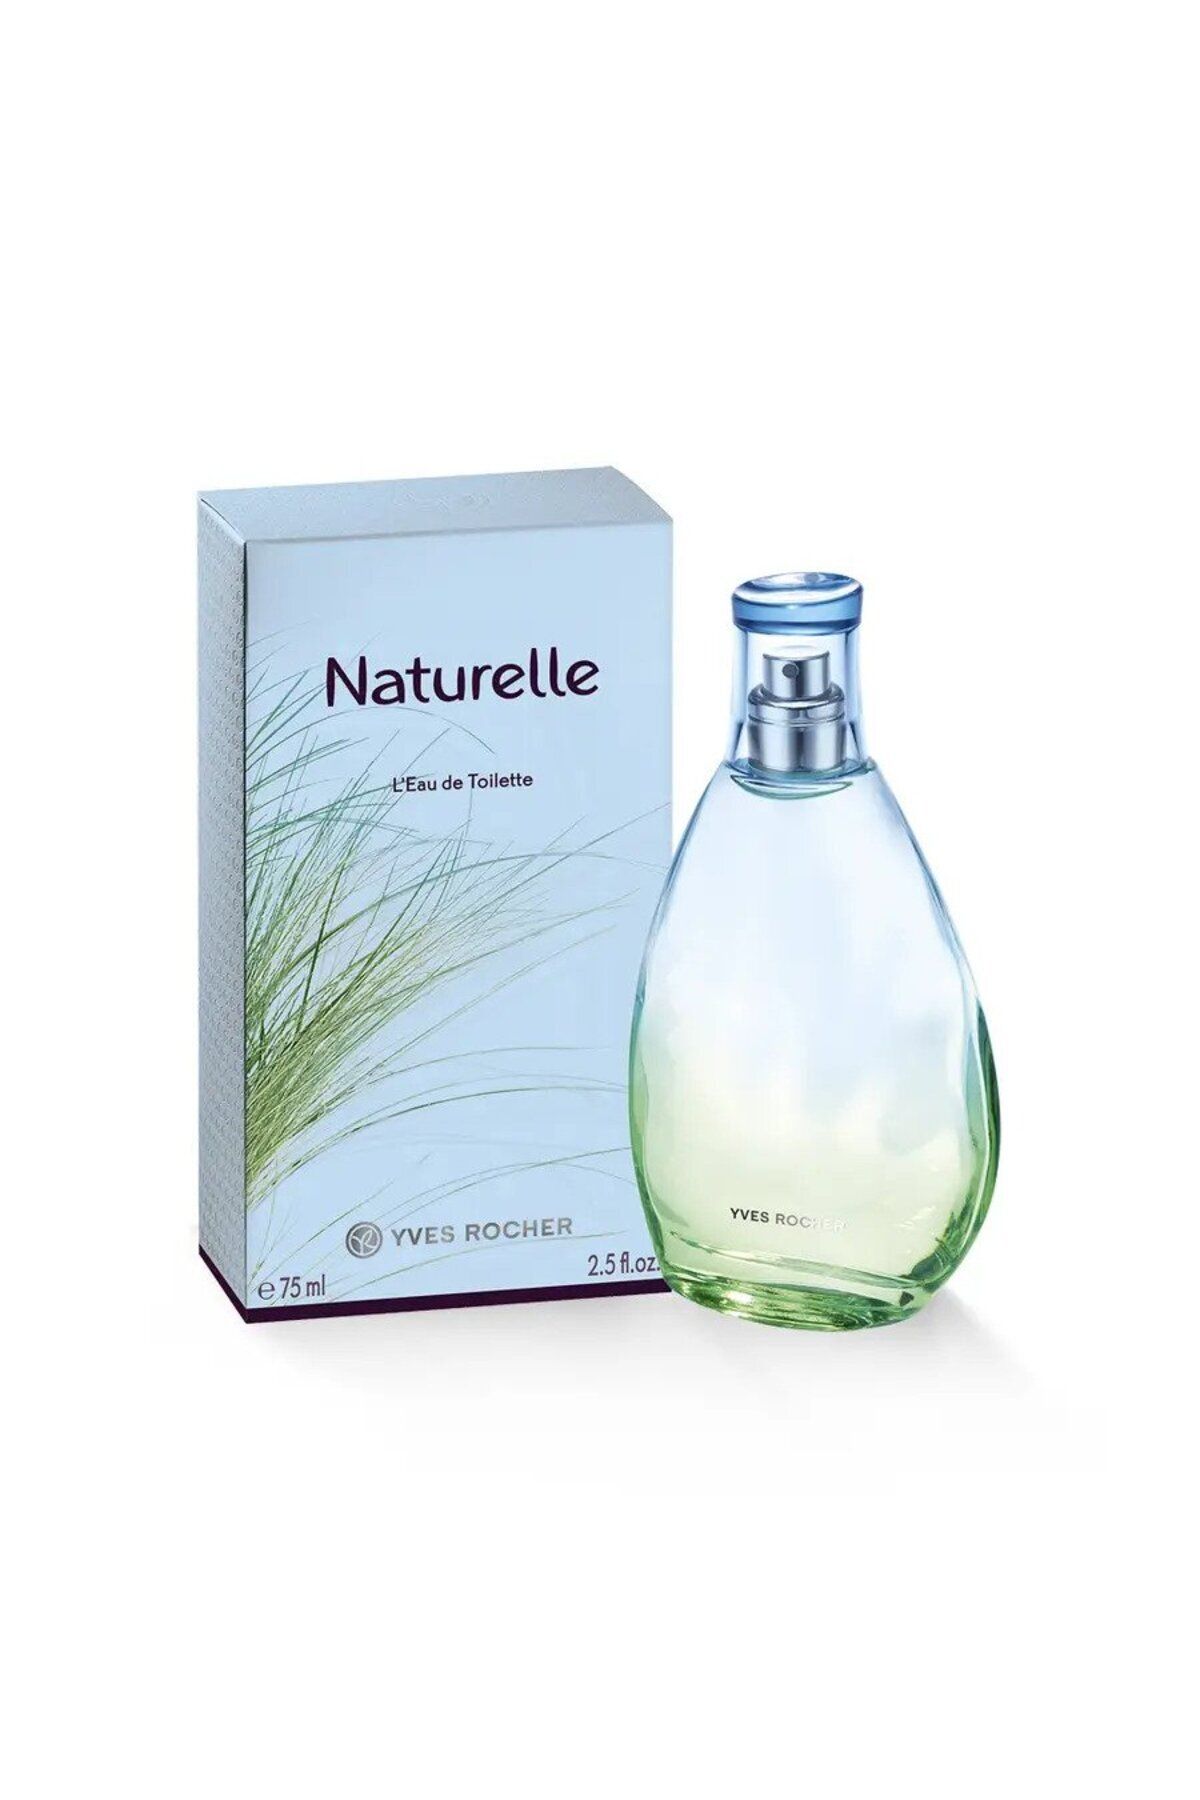 Yves Rocher Naturelle - EDT Refreshing Perfume with floral and fruity notes 75 ml SMELL11